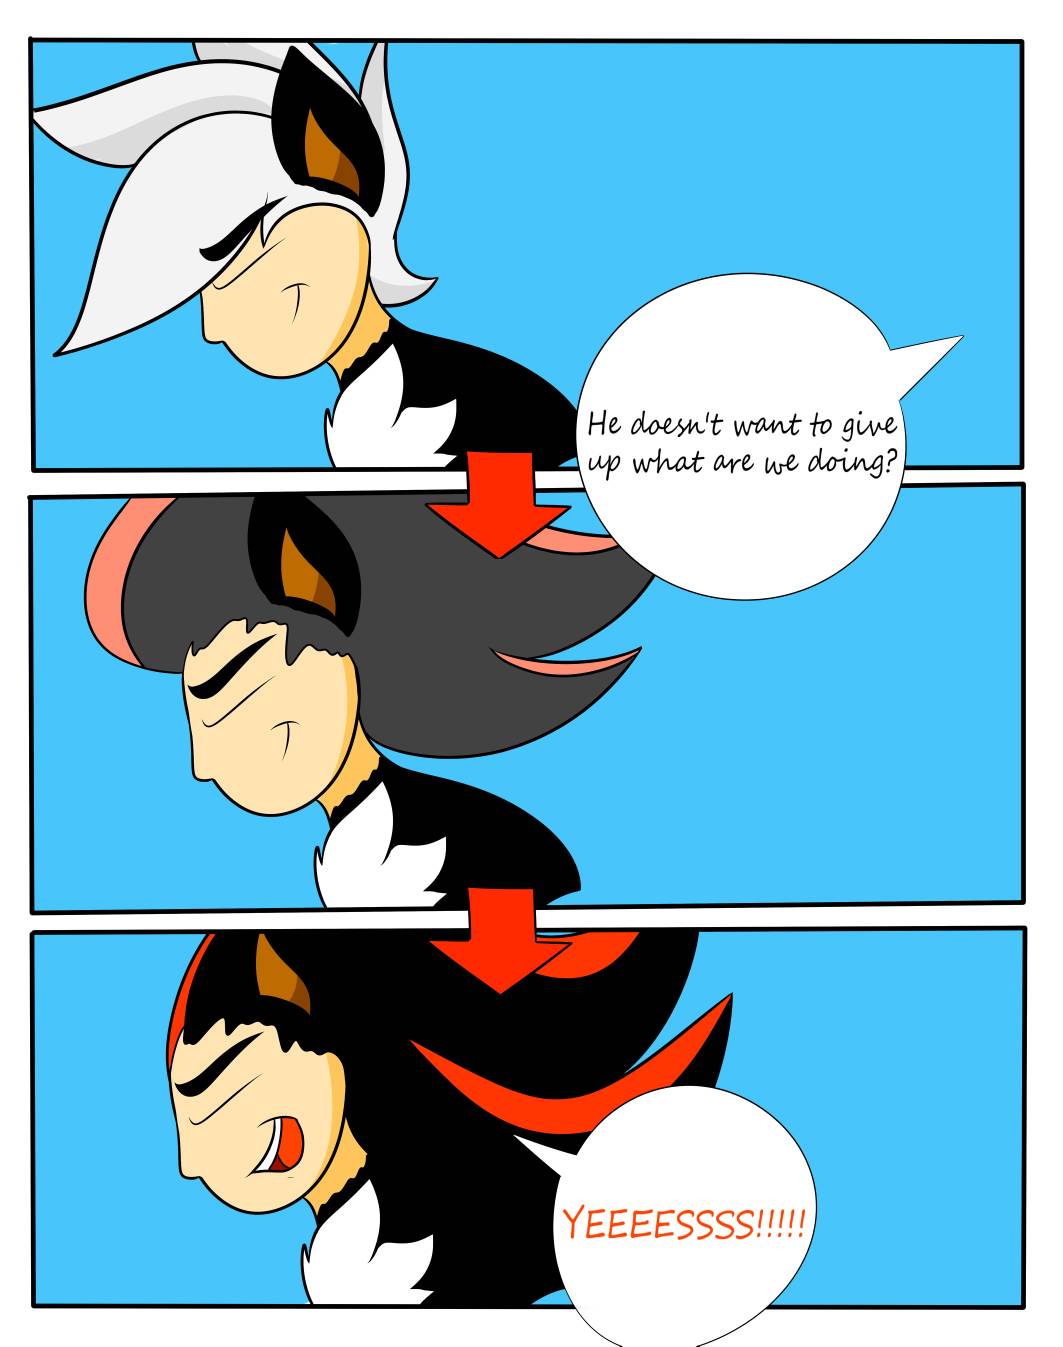 Commission - Shadow the Hedgehog (extentedversion) by Karneolienne on  DeviantArt